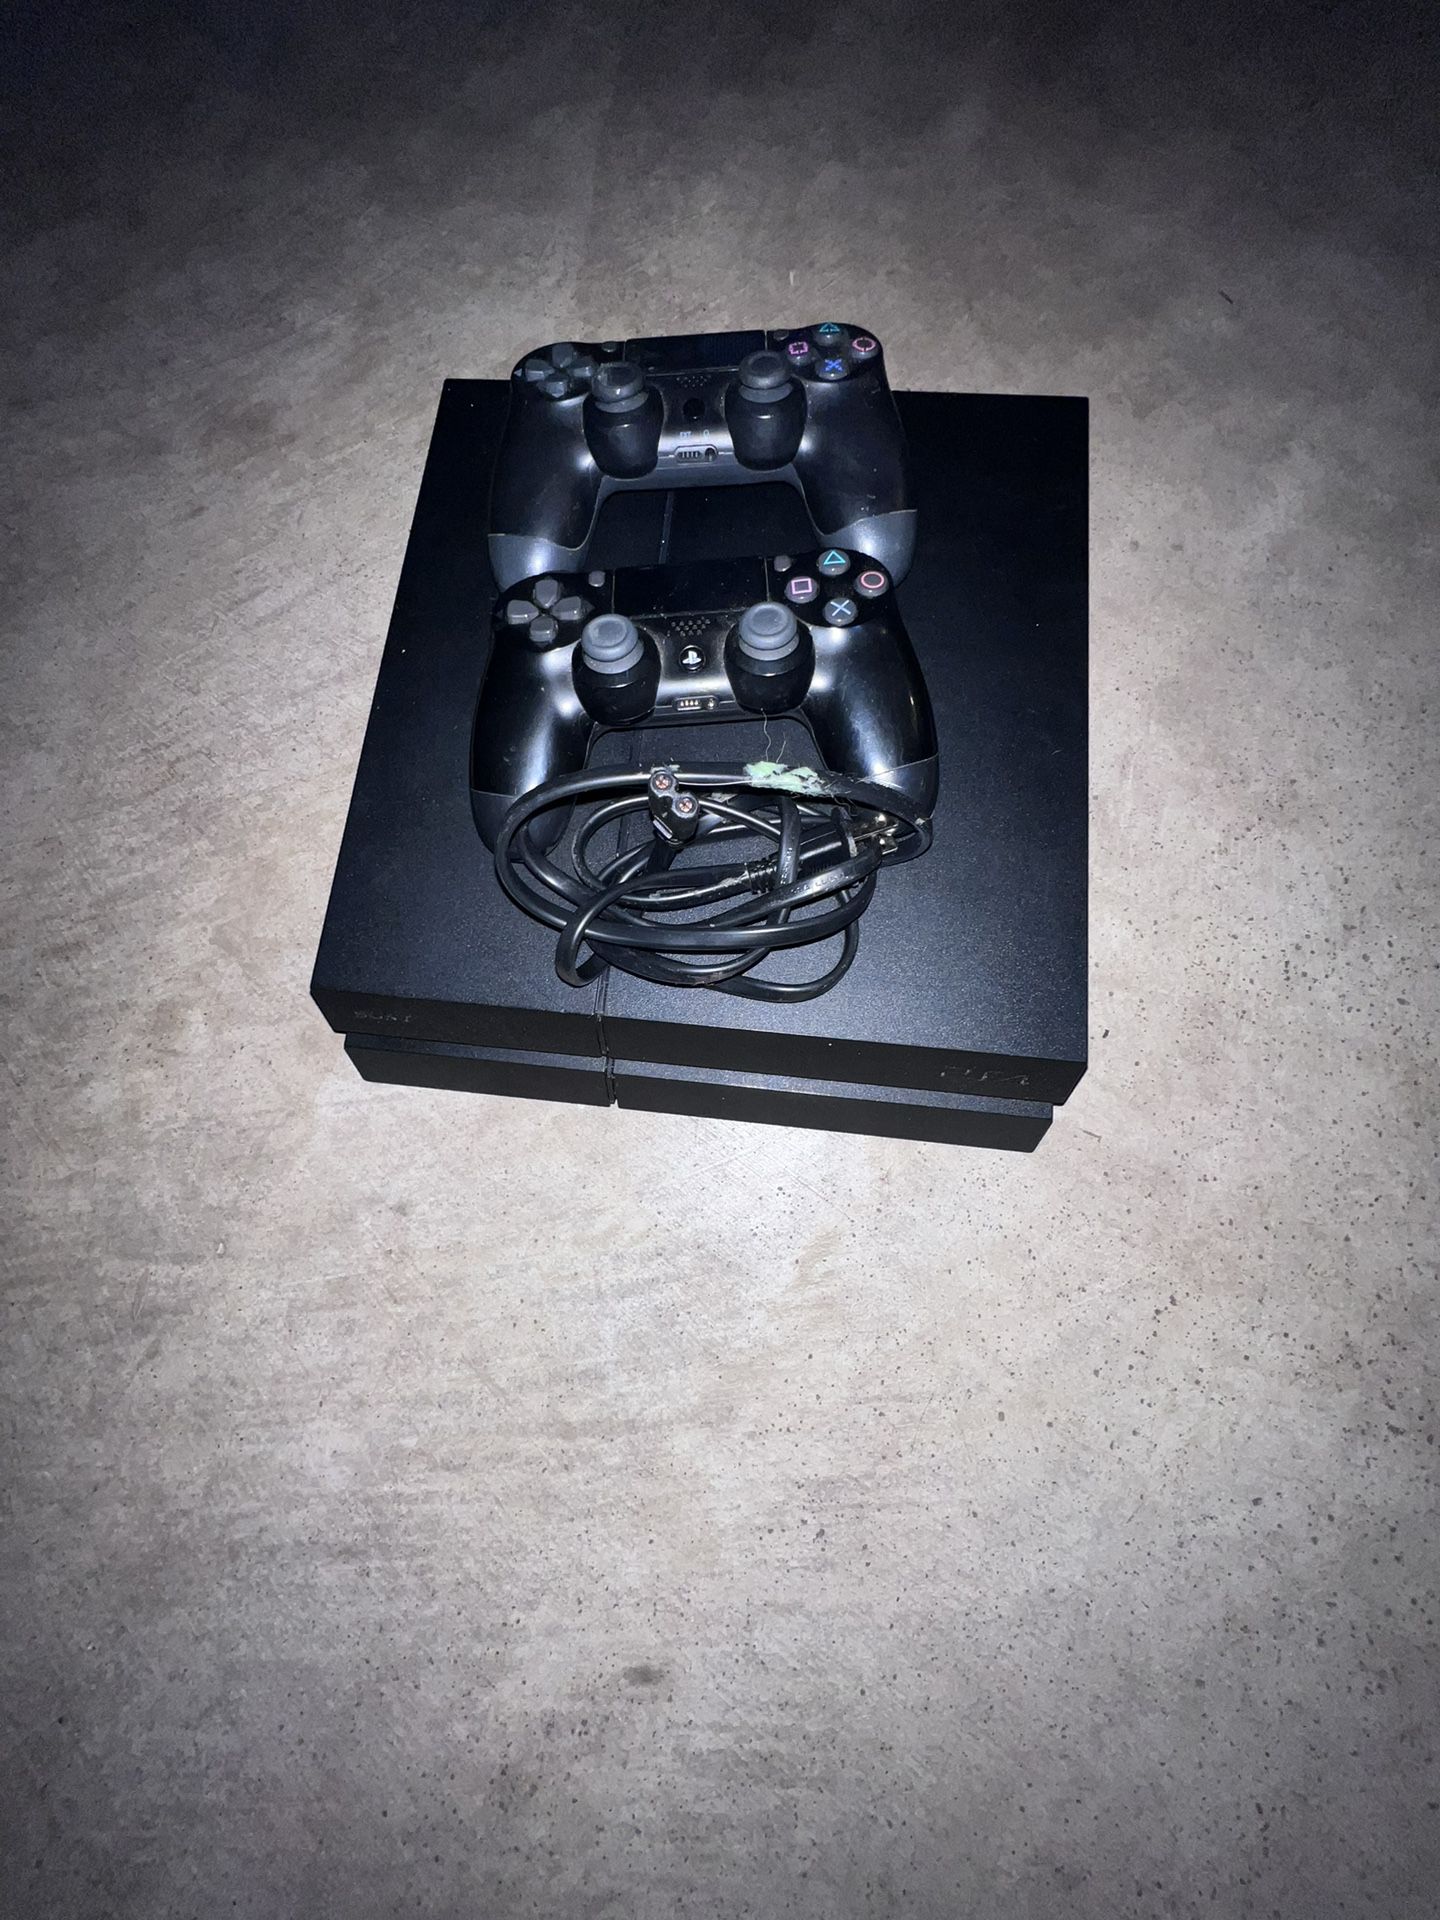 PS4 For Sale!! Works Like New Very Good Console Comes With 2 Controllers!!.